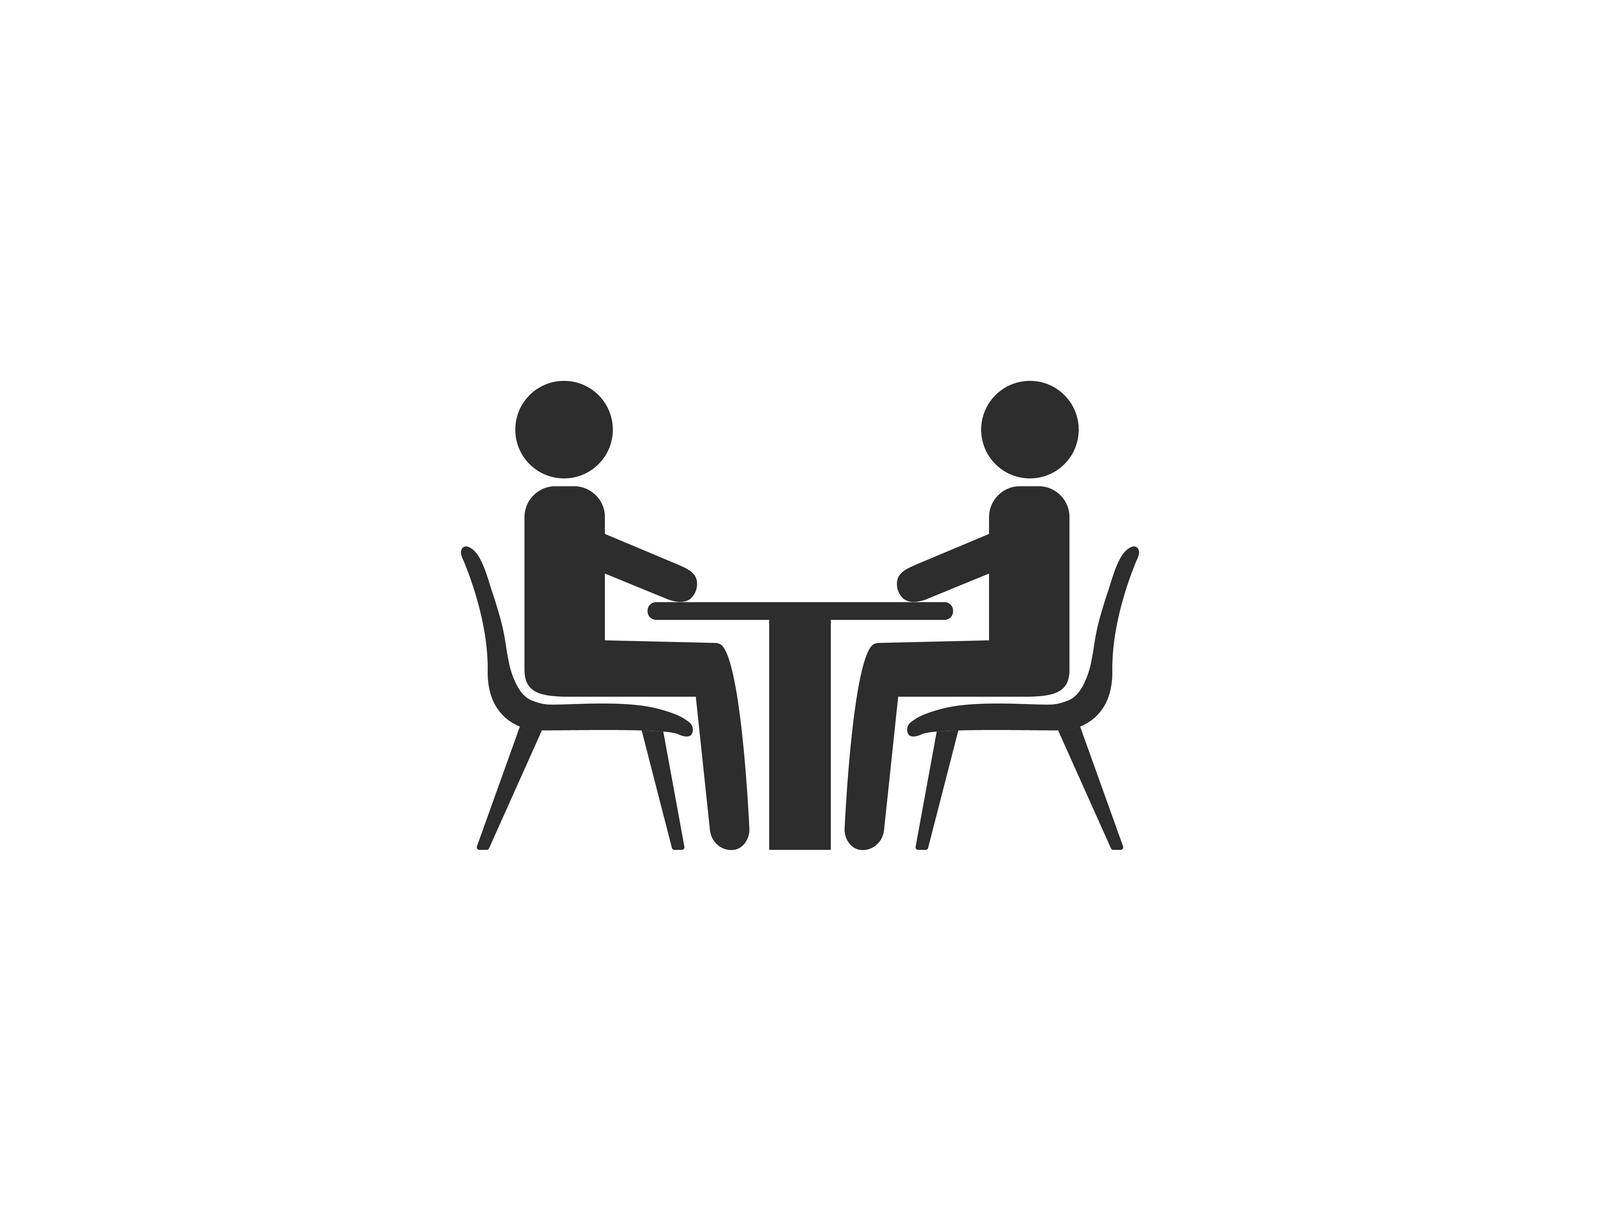 People talking icon on white background. Vector illustration. by Vertyb